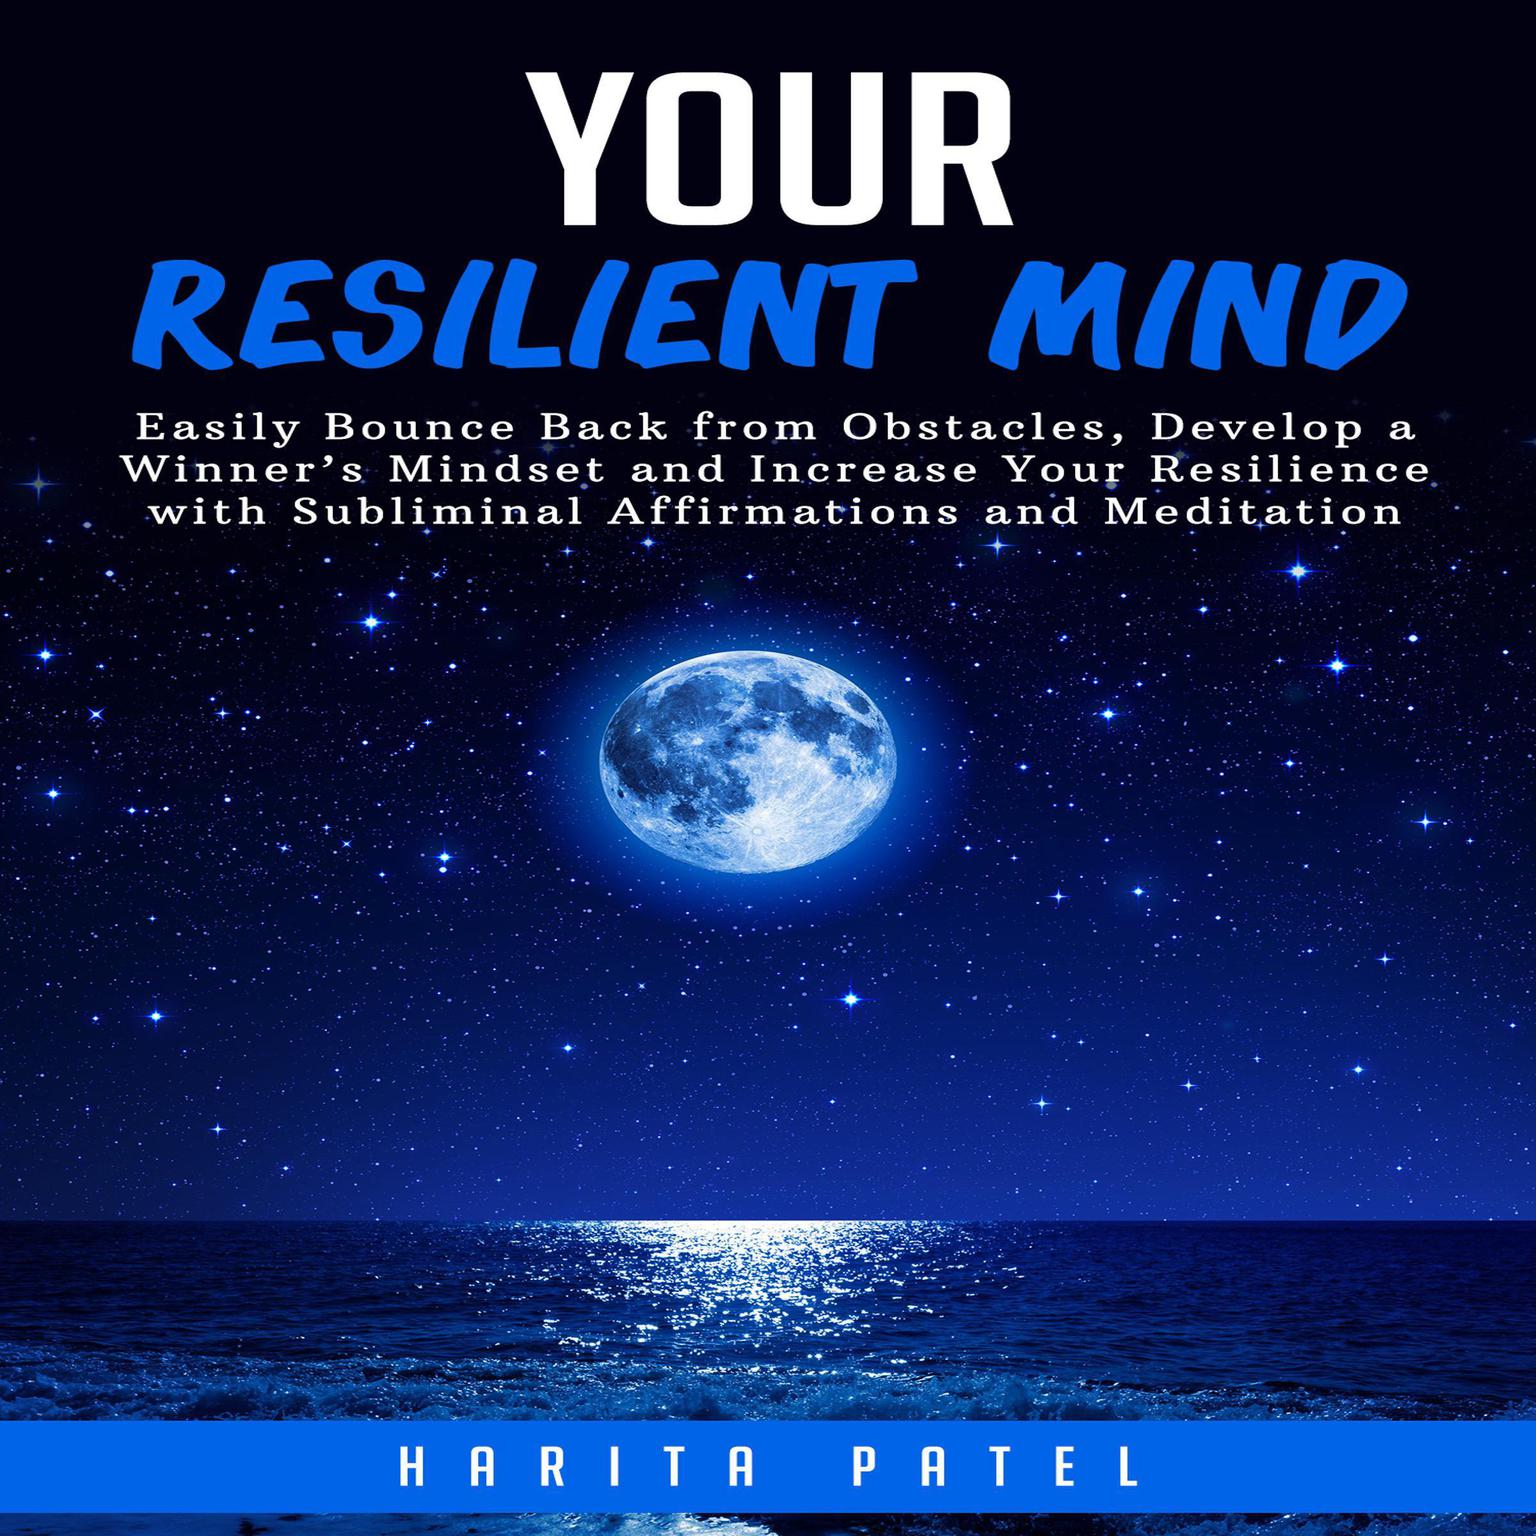 Your Resilient Mind: Easily Bounce Back from Obstacles, Develop a Winner’s Mindset and Increase Your Resilience with Subliminal Affirmations and Meditation Audiobook, by Harita Patel